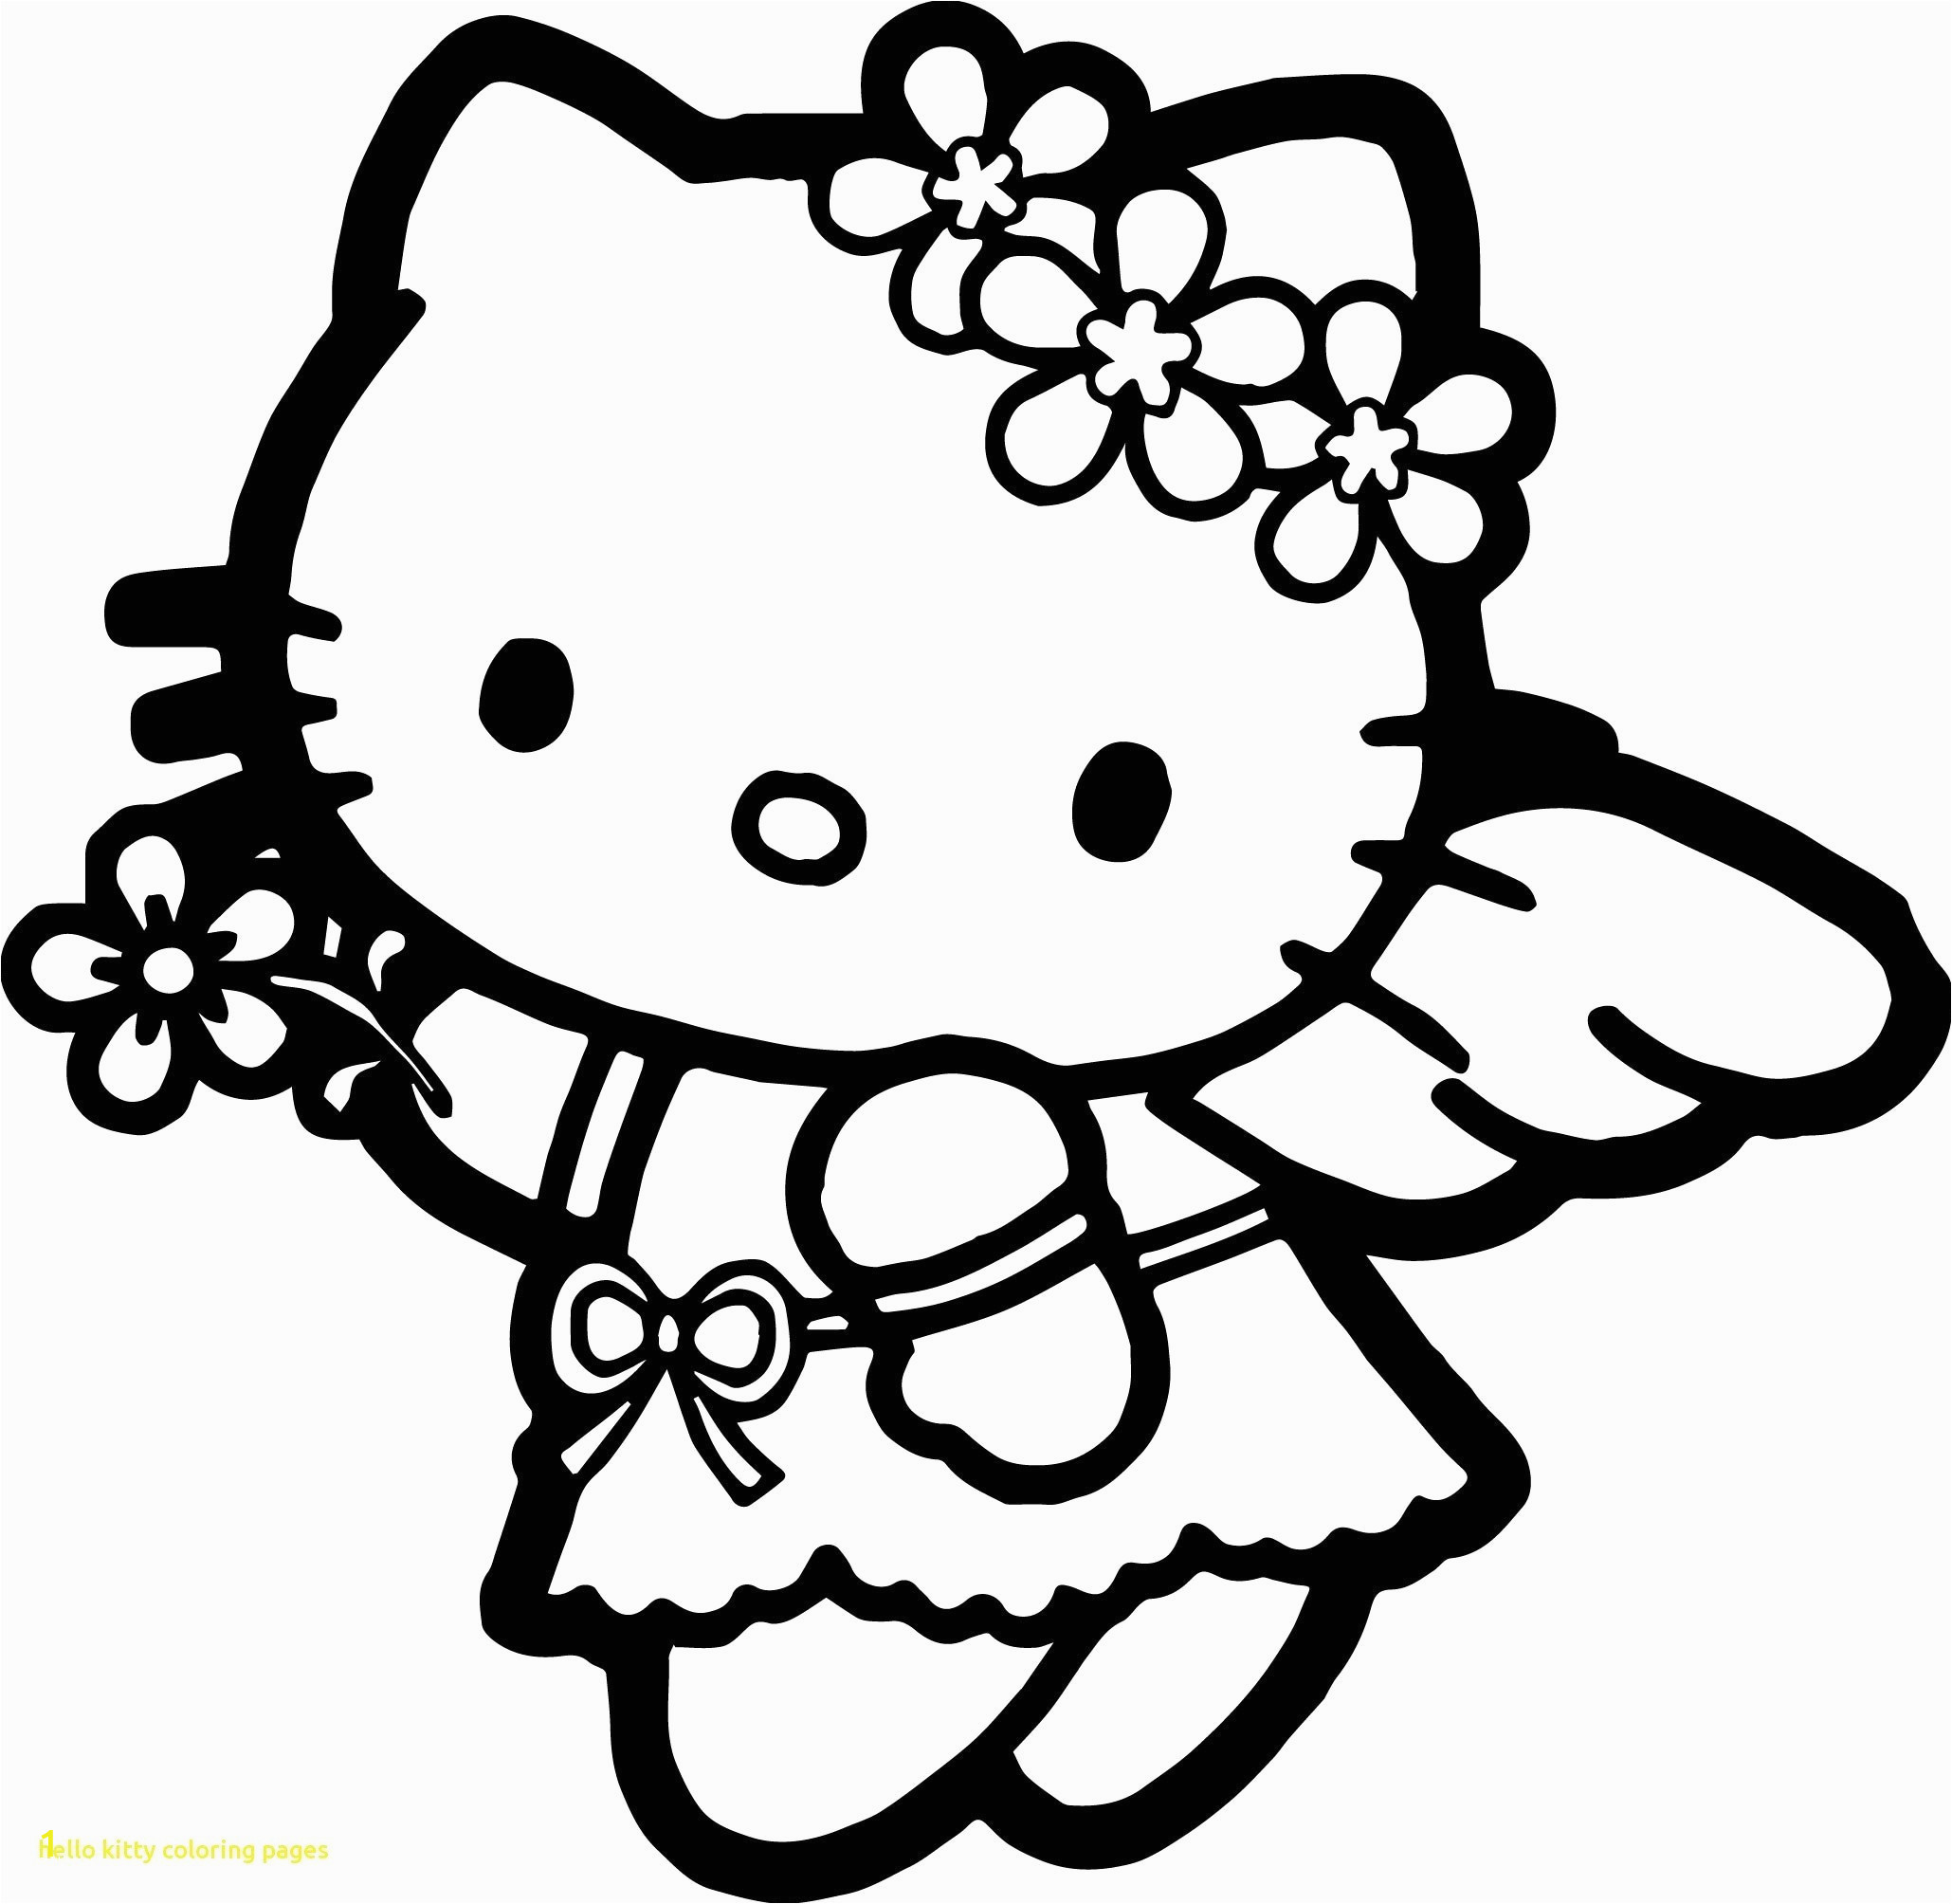 hello kitty mermaid coloring pages inspirational coloring book hello kitty coloring sheets hello kitty of hello kitty mermaid coloring pages